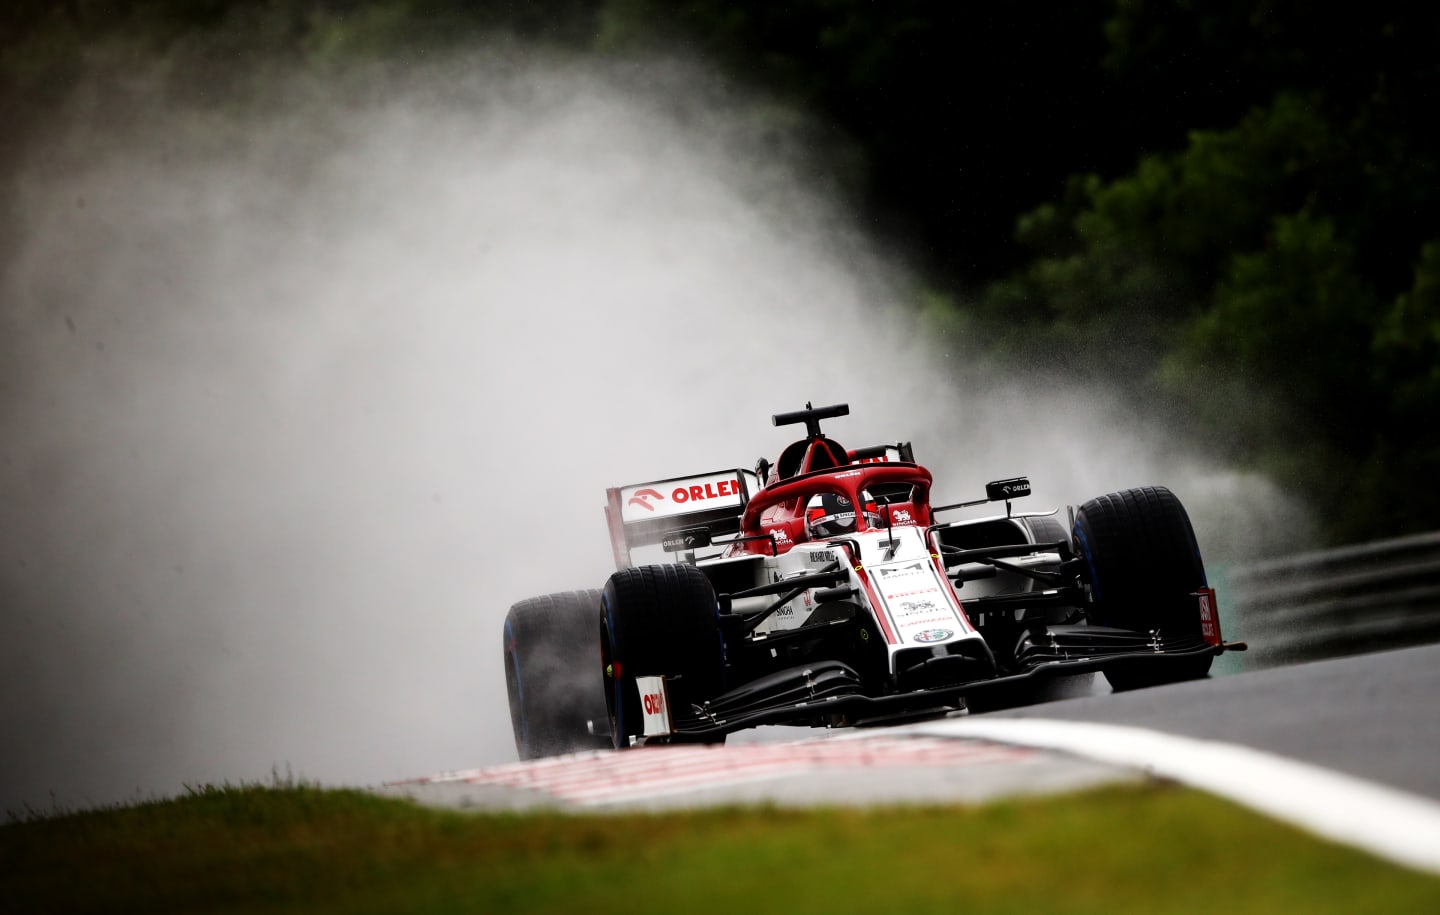 BUDAPEST, HUNGARY - JULY 17: Kimi Raikkonen of Finland driving the (7) Alfa Romeo Racing C39 Ferrari on track during practice for the F1 Grand Prix of Hungary at Hungaroring on July 17, 2020 in Budapest, Hungary. (Photo by Bryn Lennon/Getty Images)